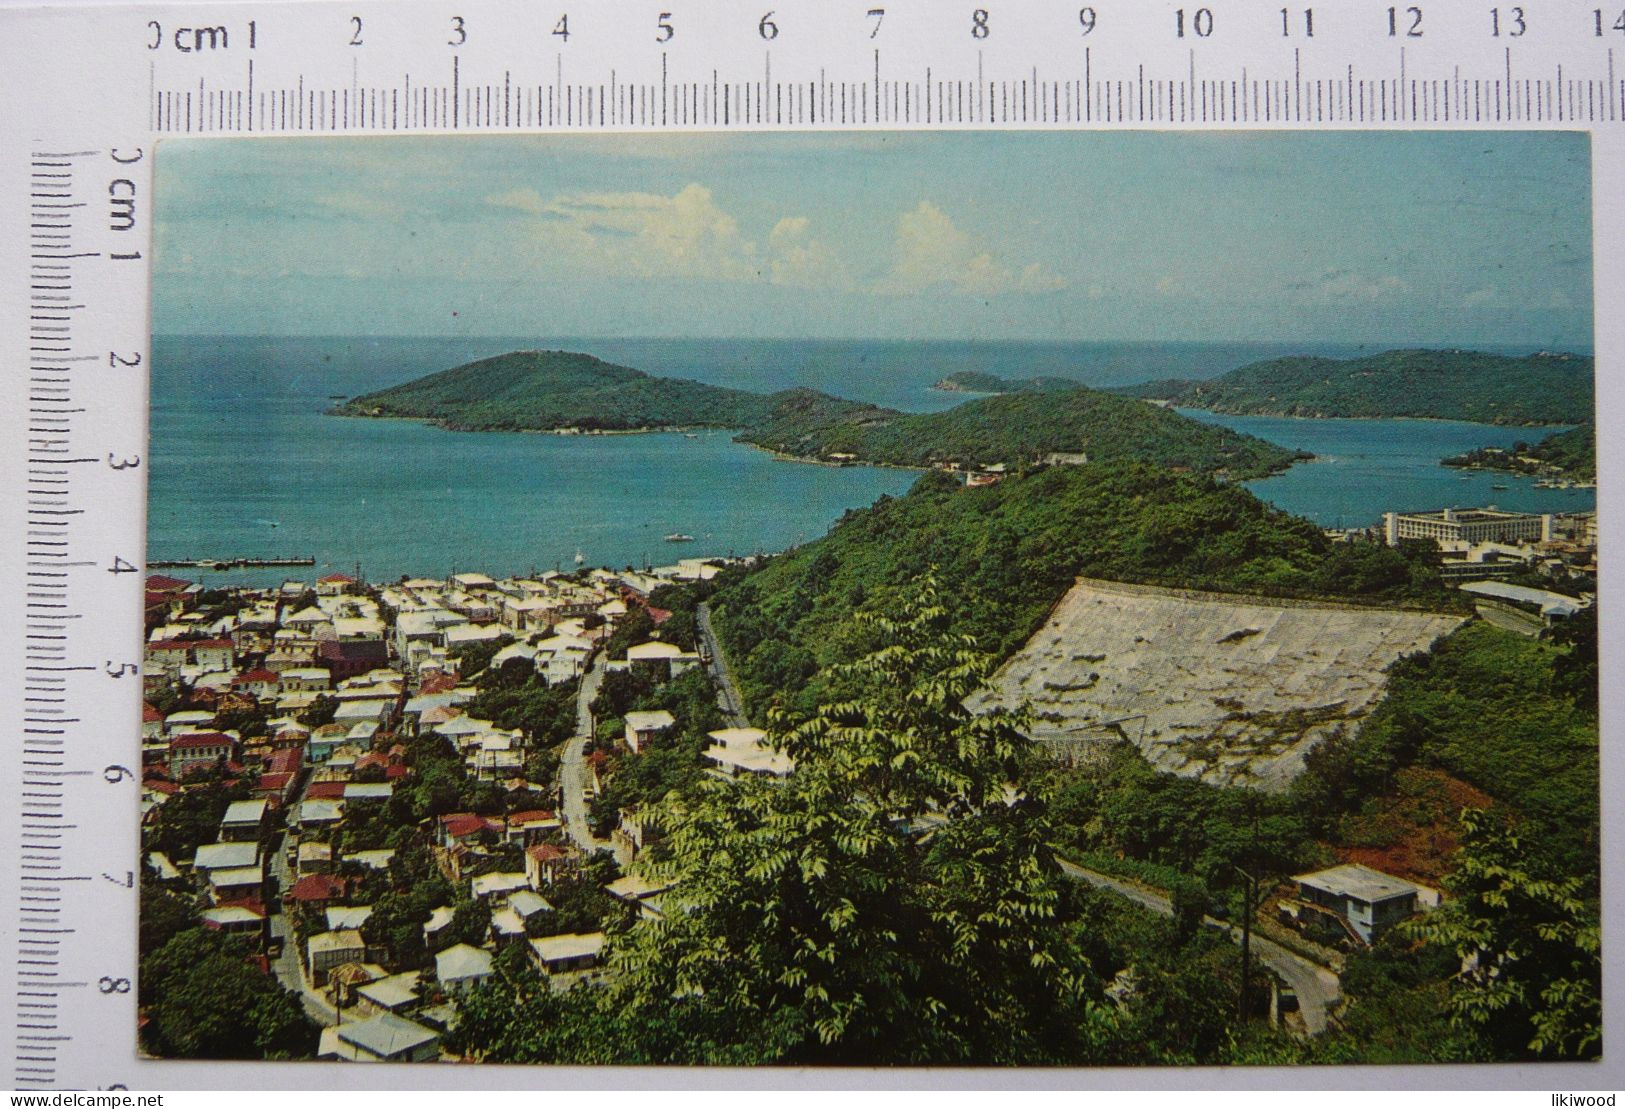 Charlotte Amalie Harbor, With Hassel And Water Islands Offshore, St.Thomas - Virgin Islands - Vierges (Iles), Amér.